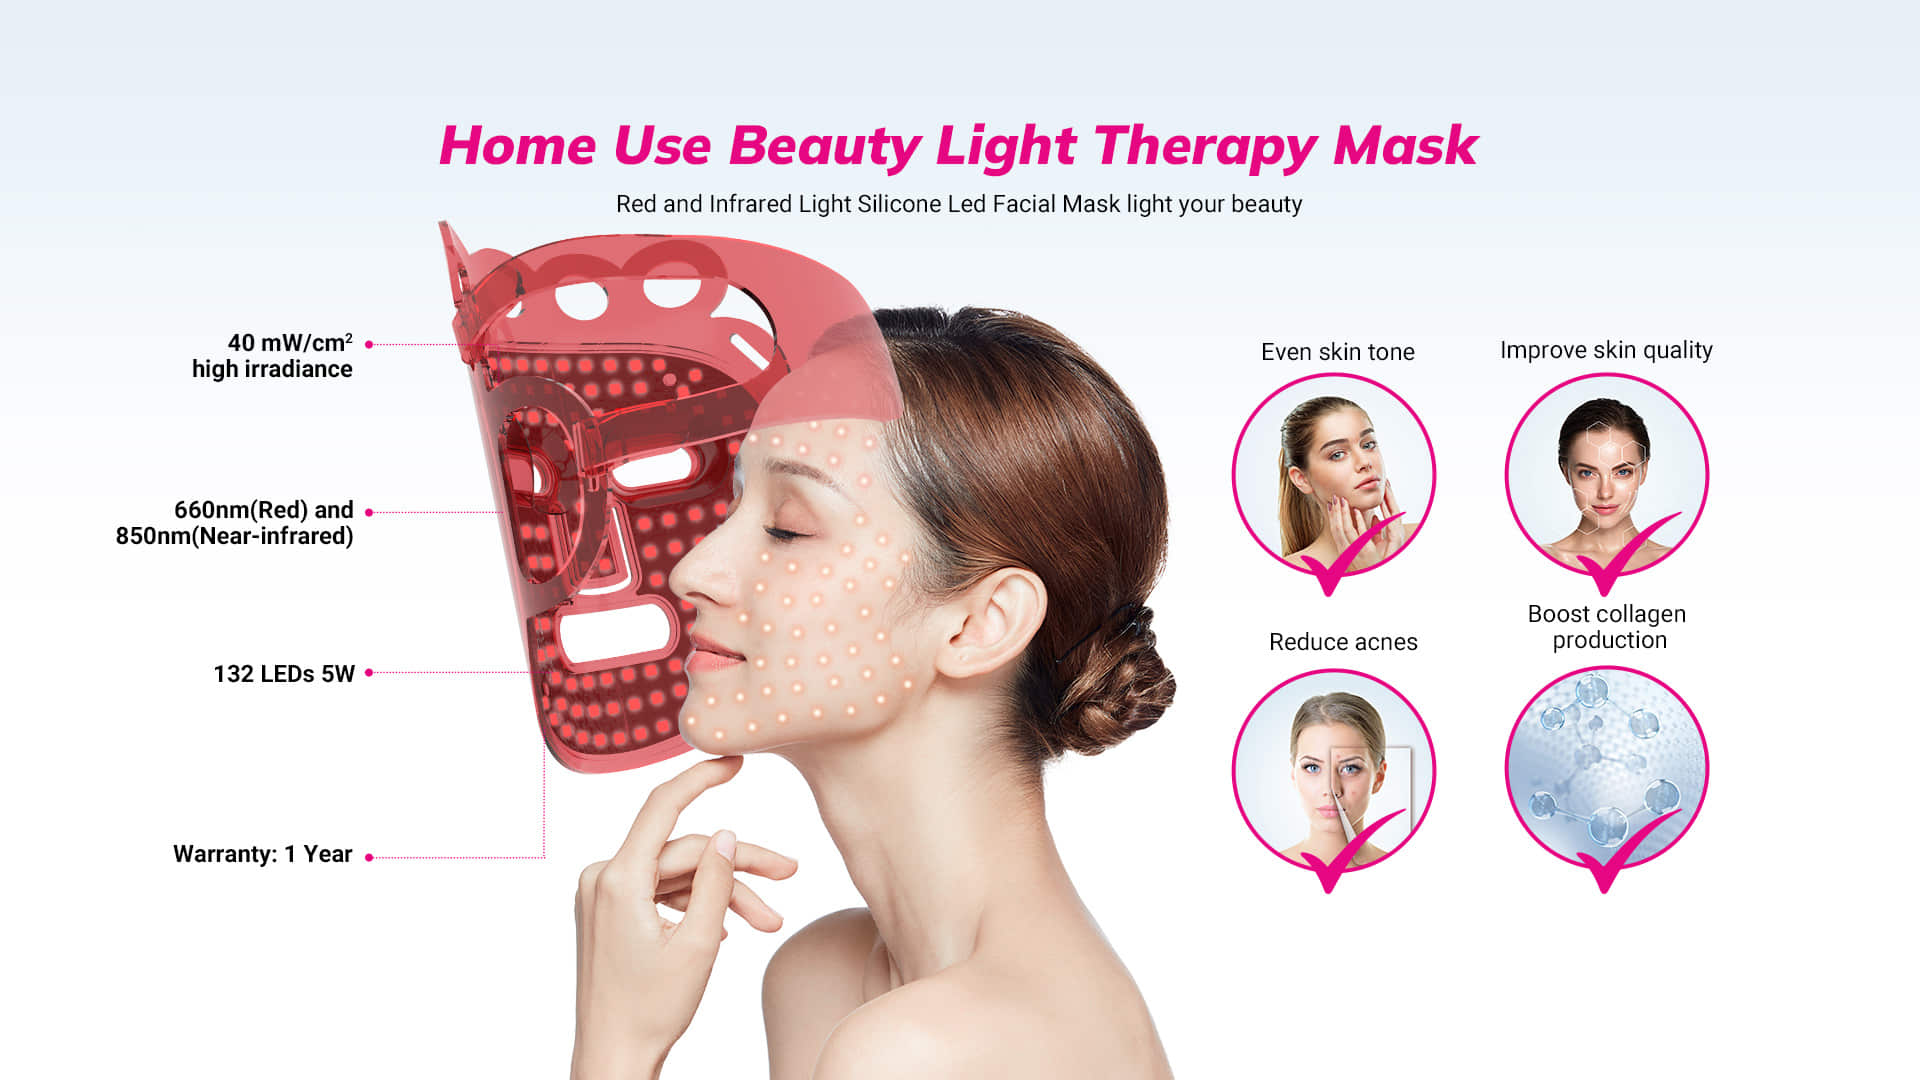 RLB04 Red and Infrared Light Silicone Led Facial Mask_02